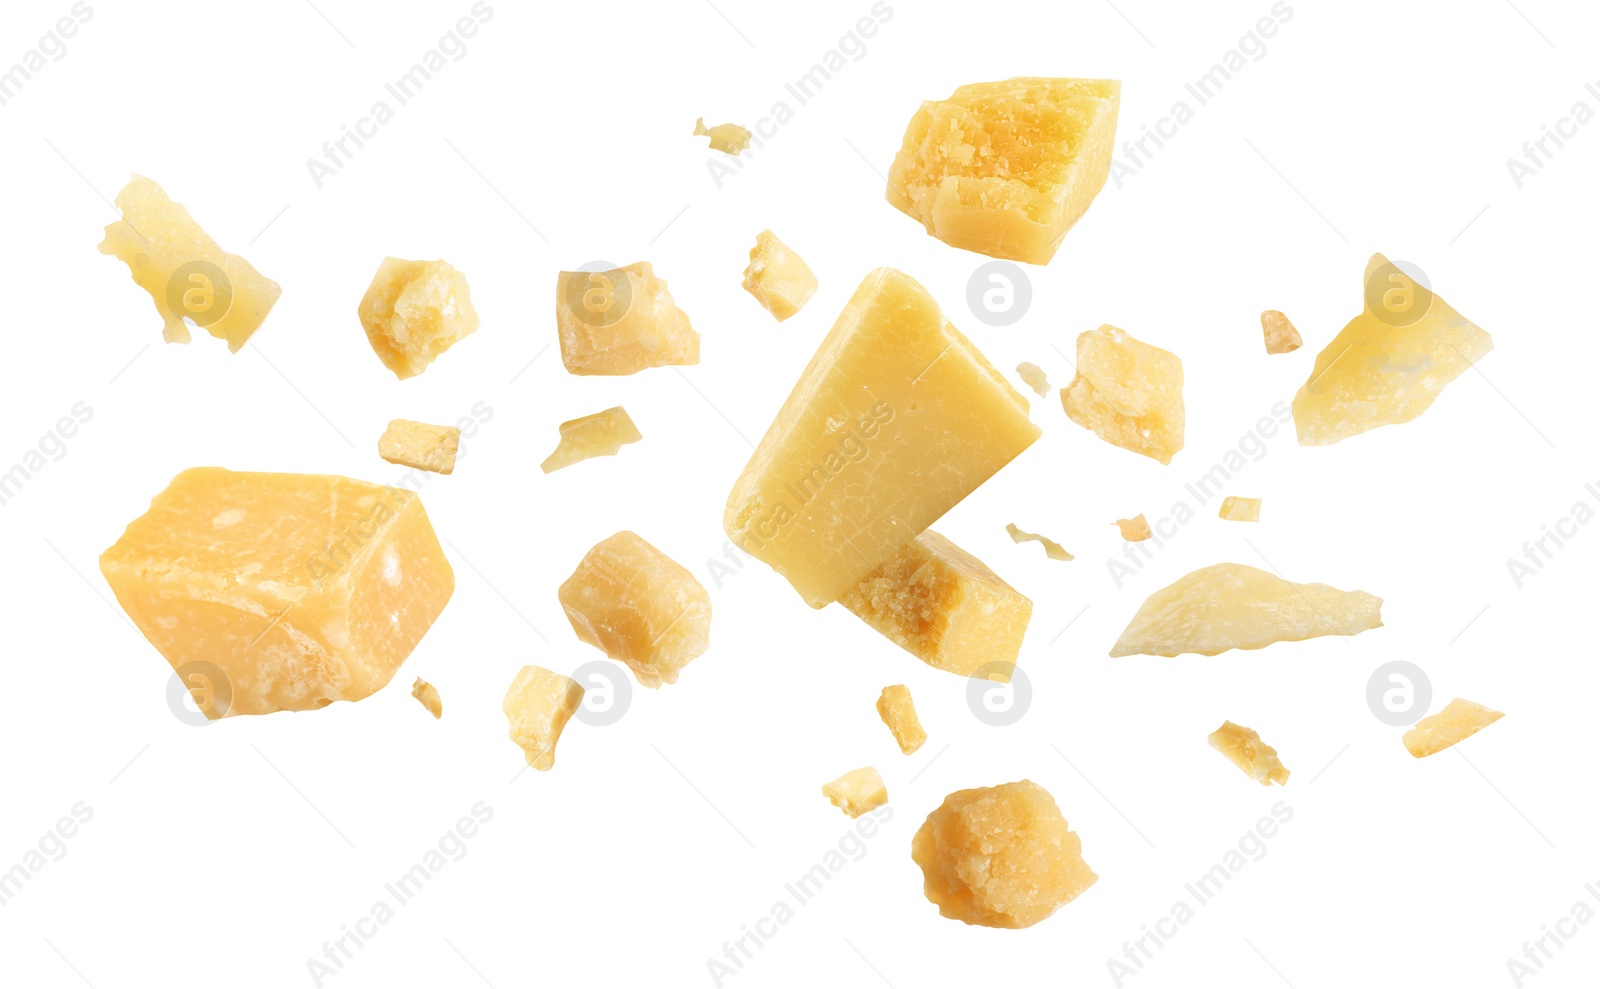 Image of Pieces of delicious parmesan cheese flying on white background